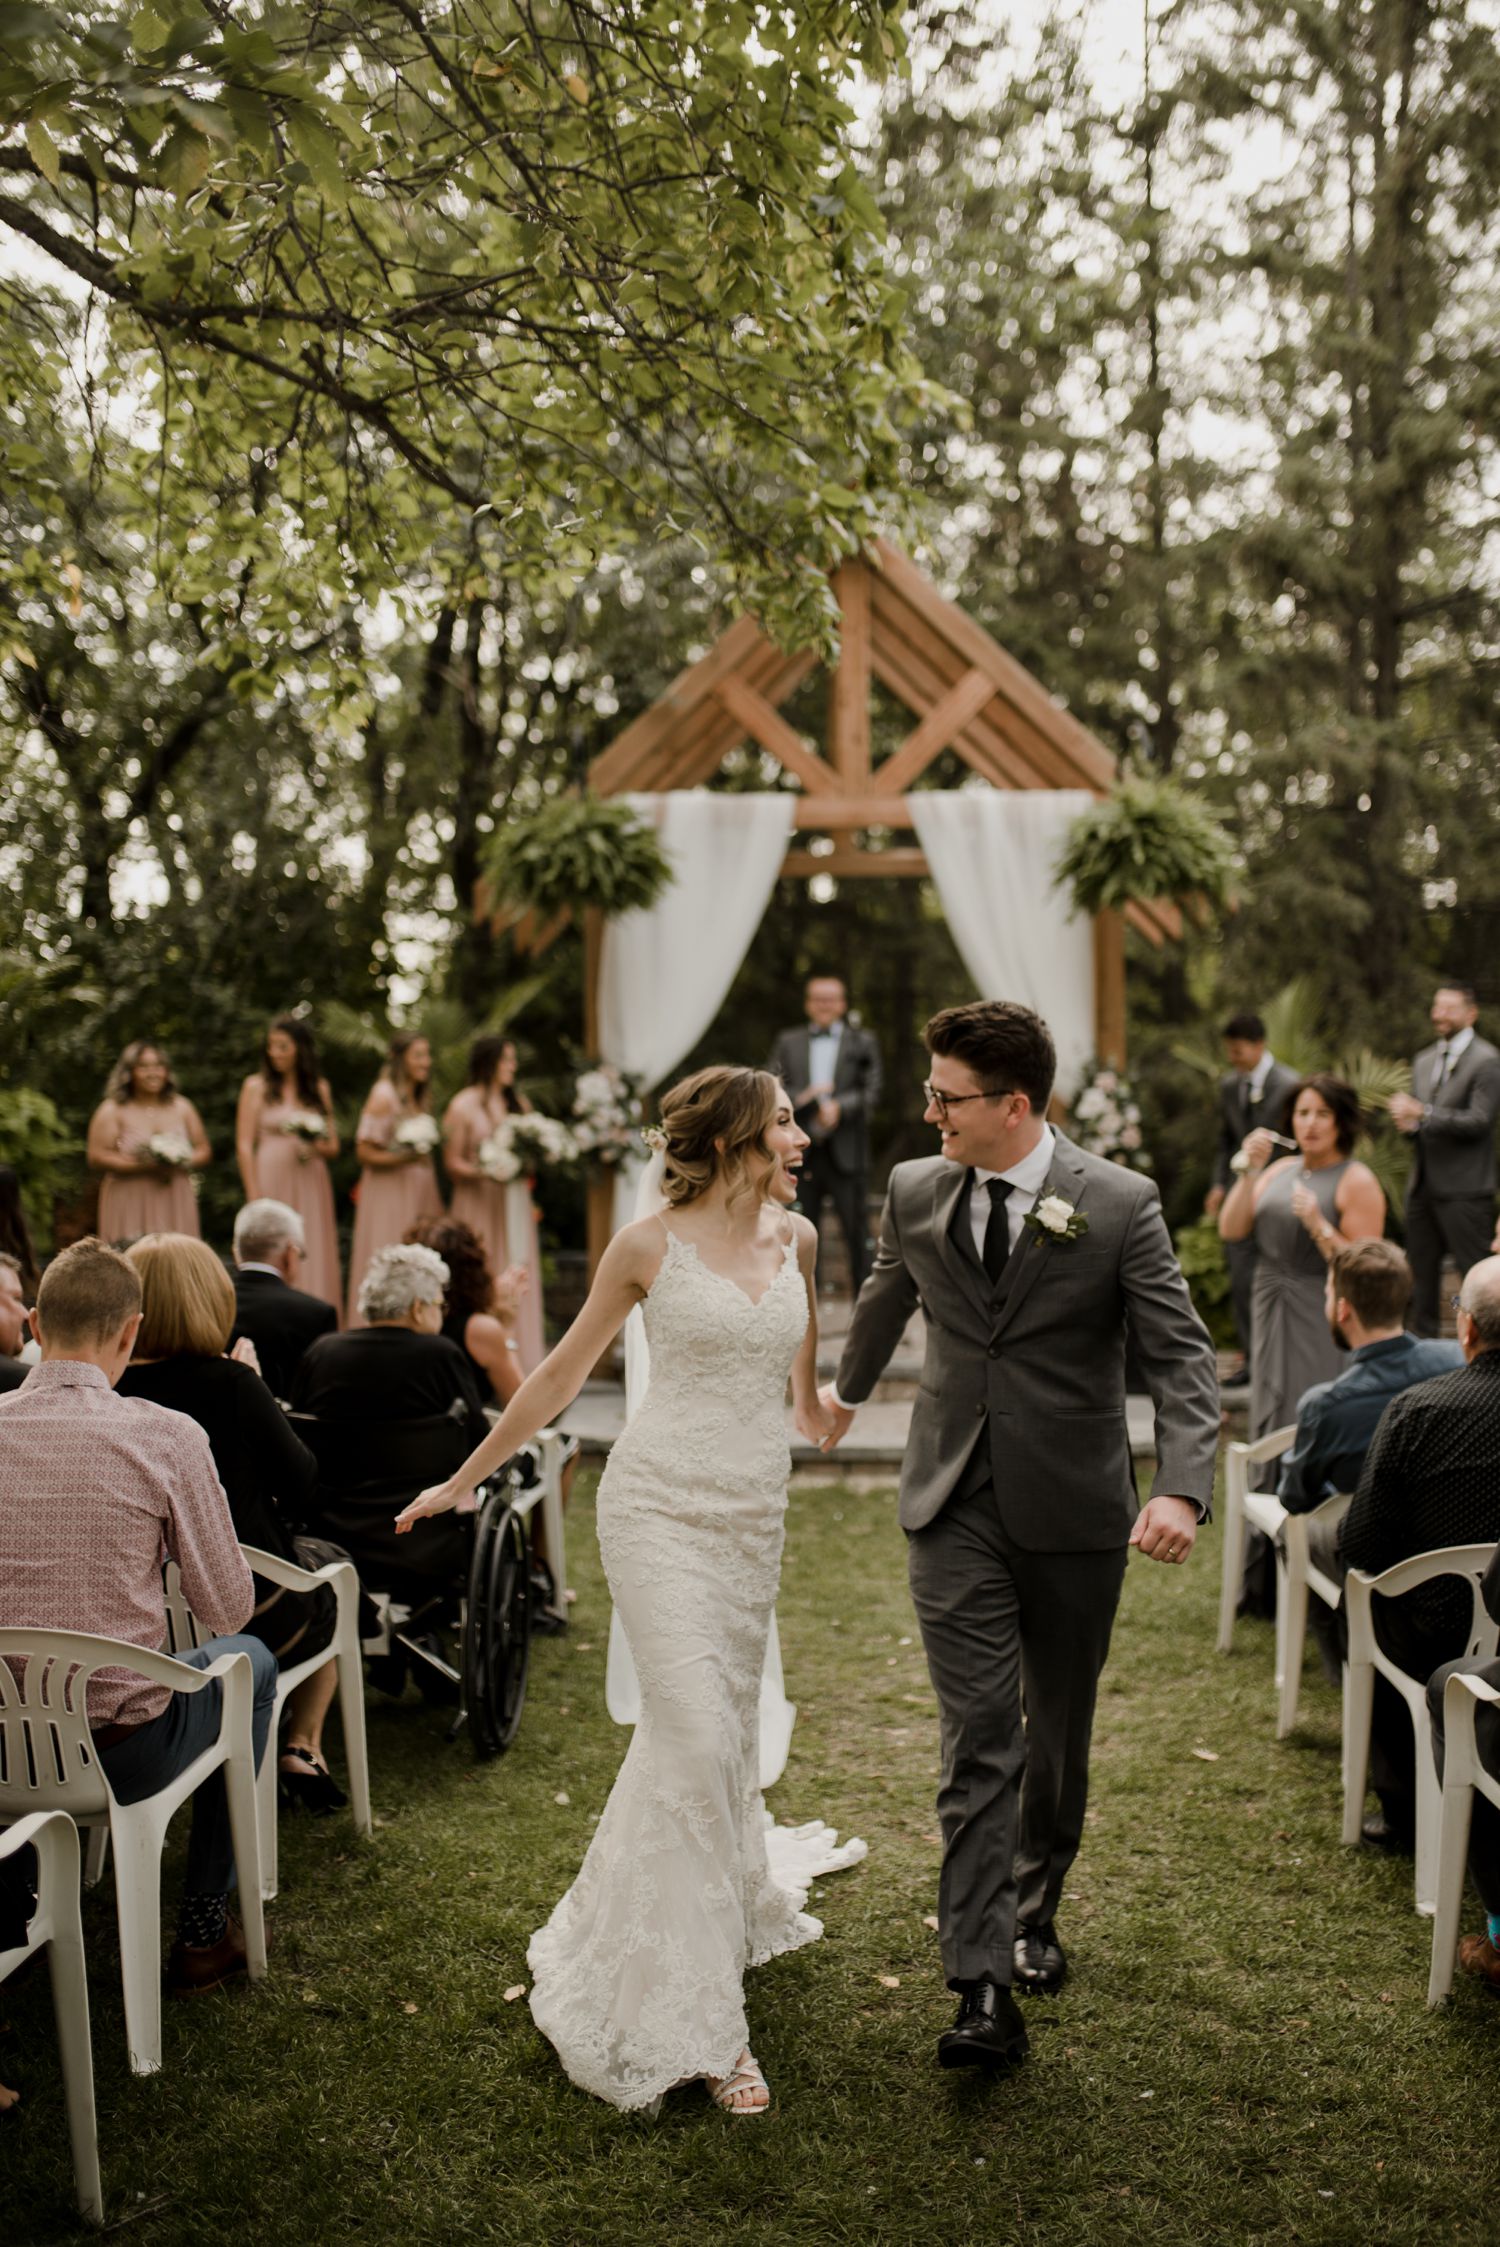 Shelby and Jesse celebrating their Evergreen village wedding in fall. Rustic boho wedding details. Photographed by Vanessa Renae Photography, a Winnipeg Wedding photographer